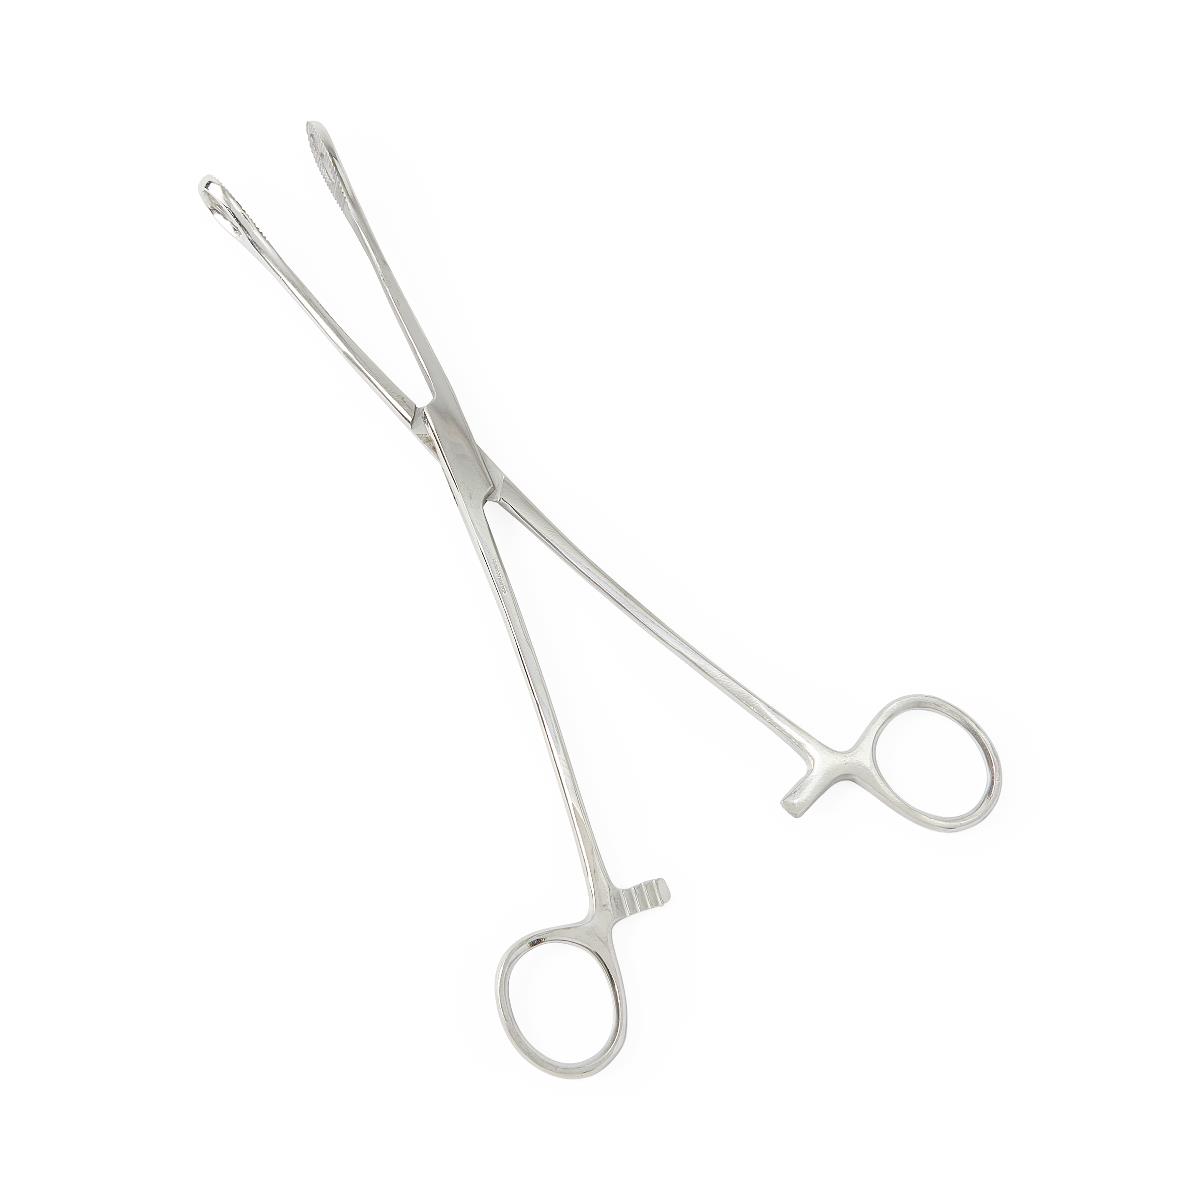 Disposable Plastic Forceps 4-1/2 • First Aid Supplies Online